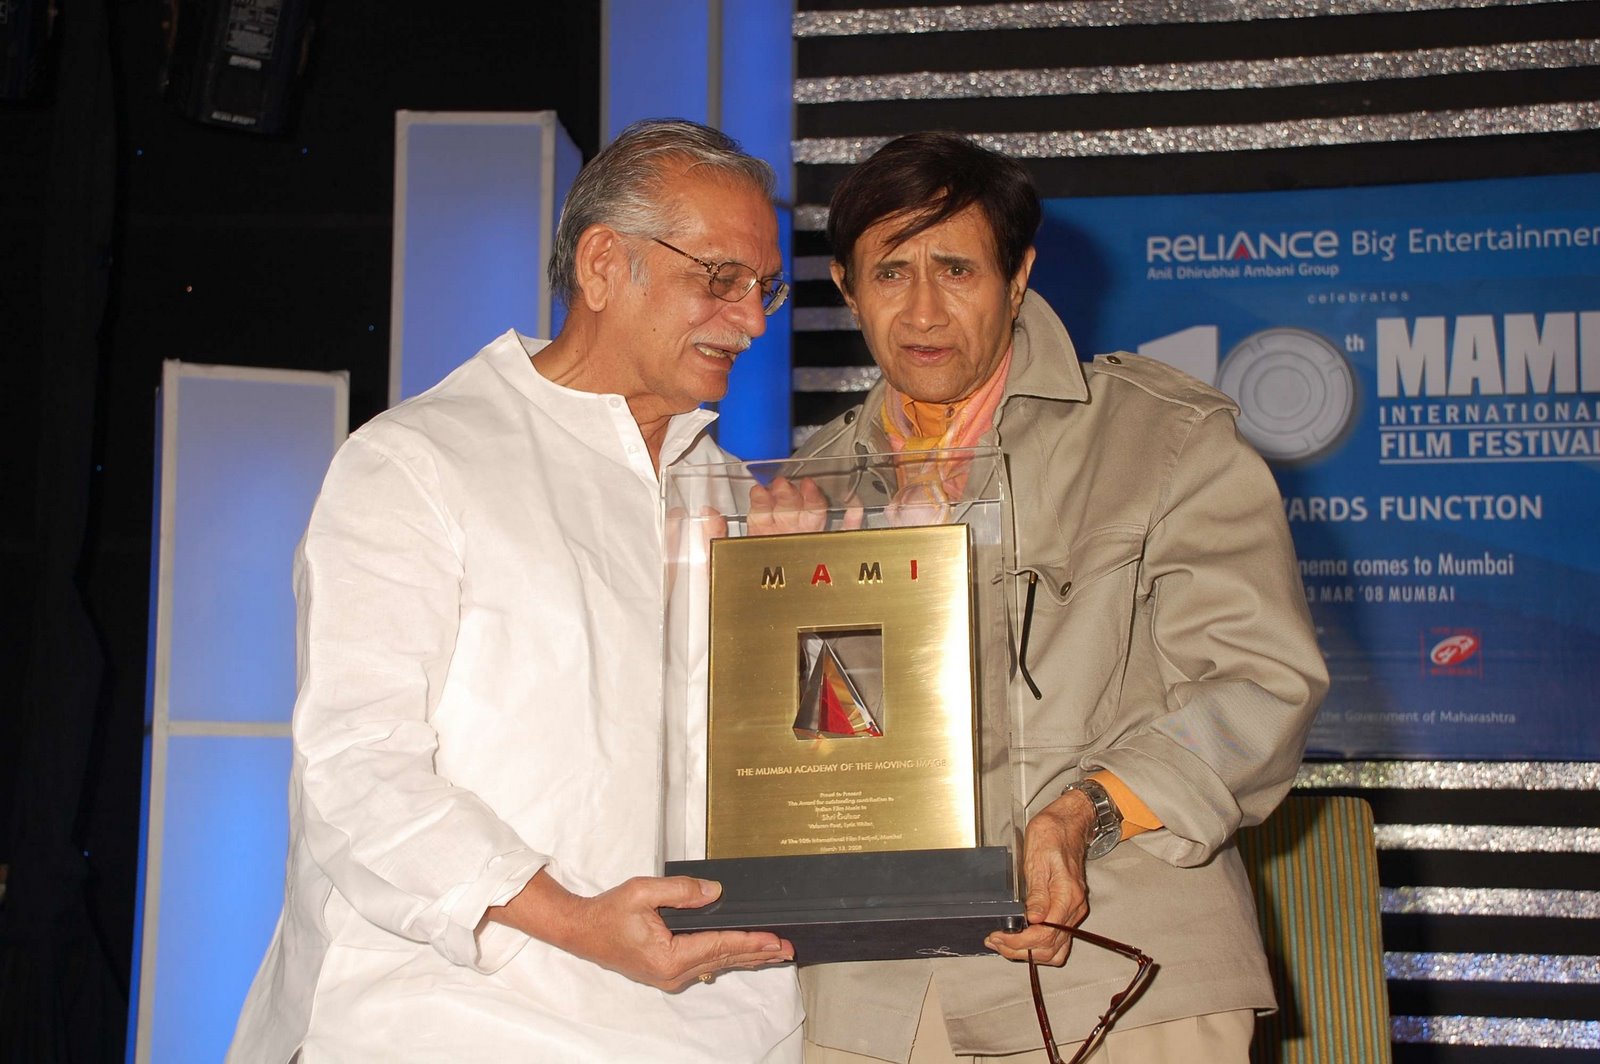 [Shri+Gulzar+feliciated+by+Dev+Anand+for+Outstanding+Contribution+to+Indian+Film+Music+as+Lyrics+Writer-2.JPG]